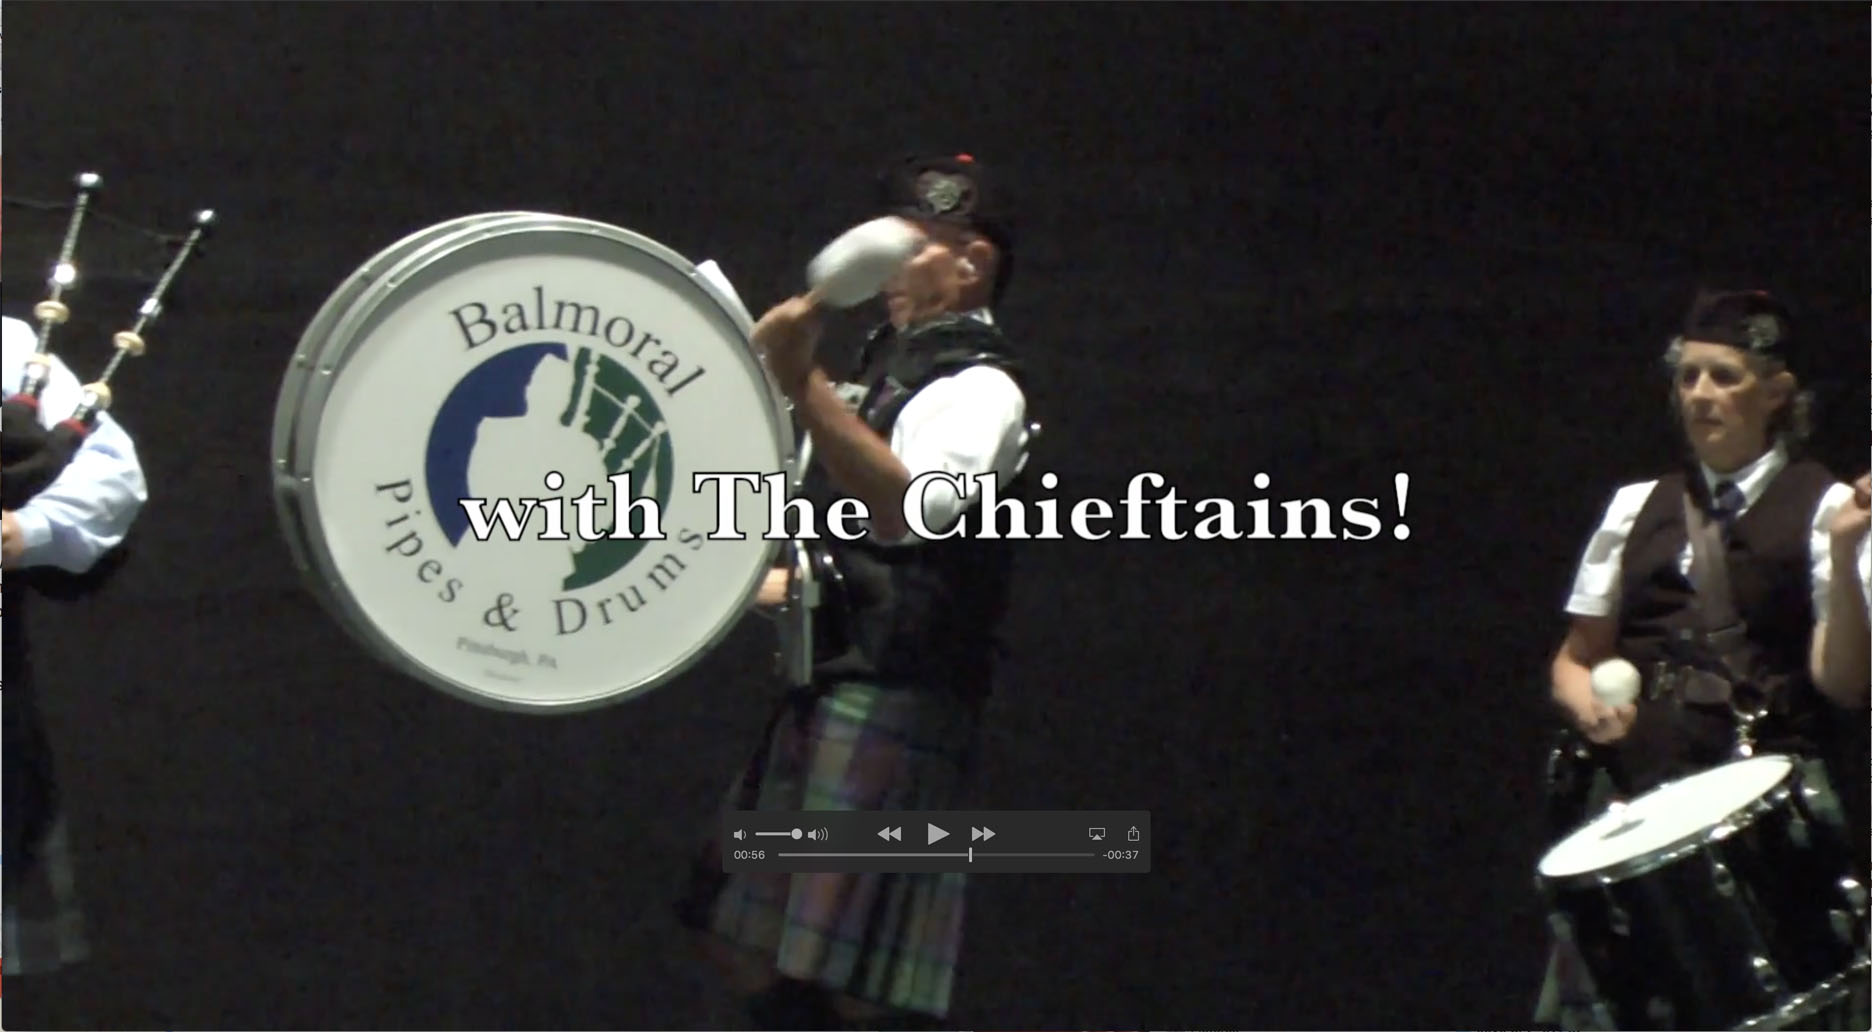 Balmoral Pipes & Drums play with The Chieftains for their farewell tour Irish Goodbye.